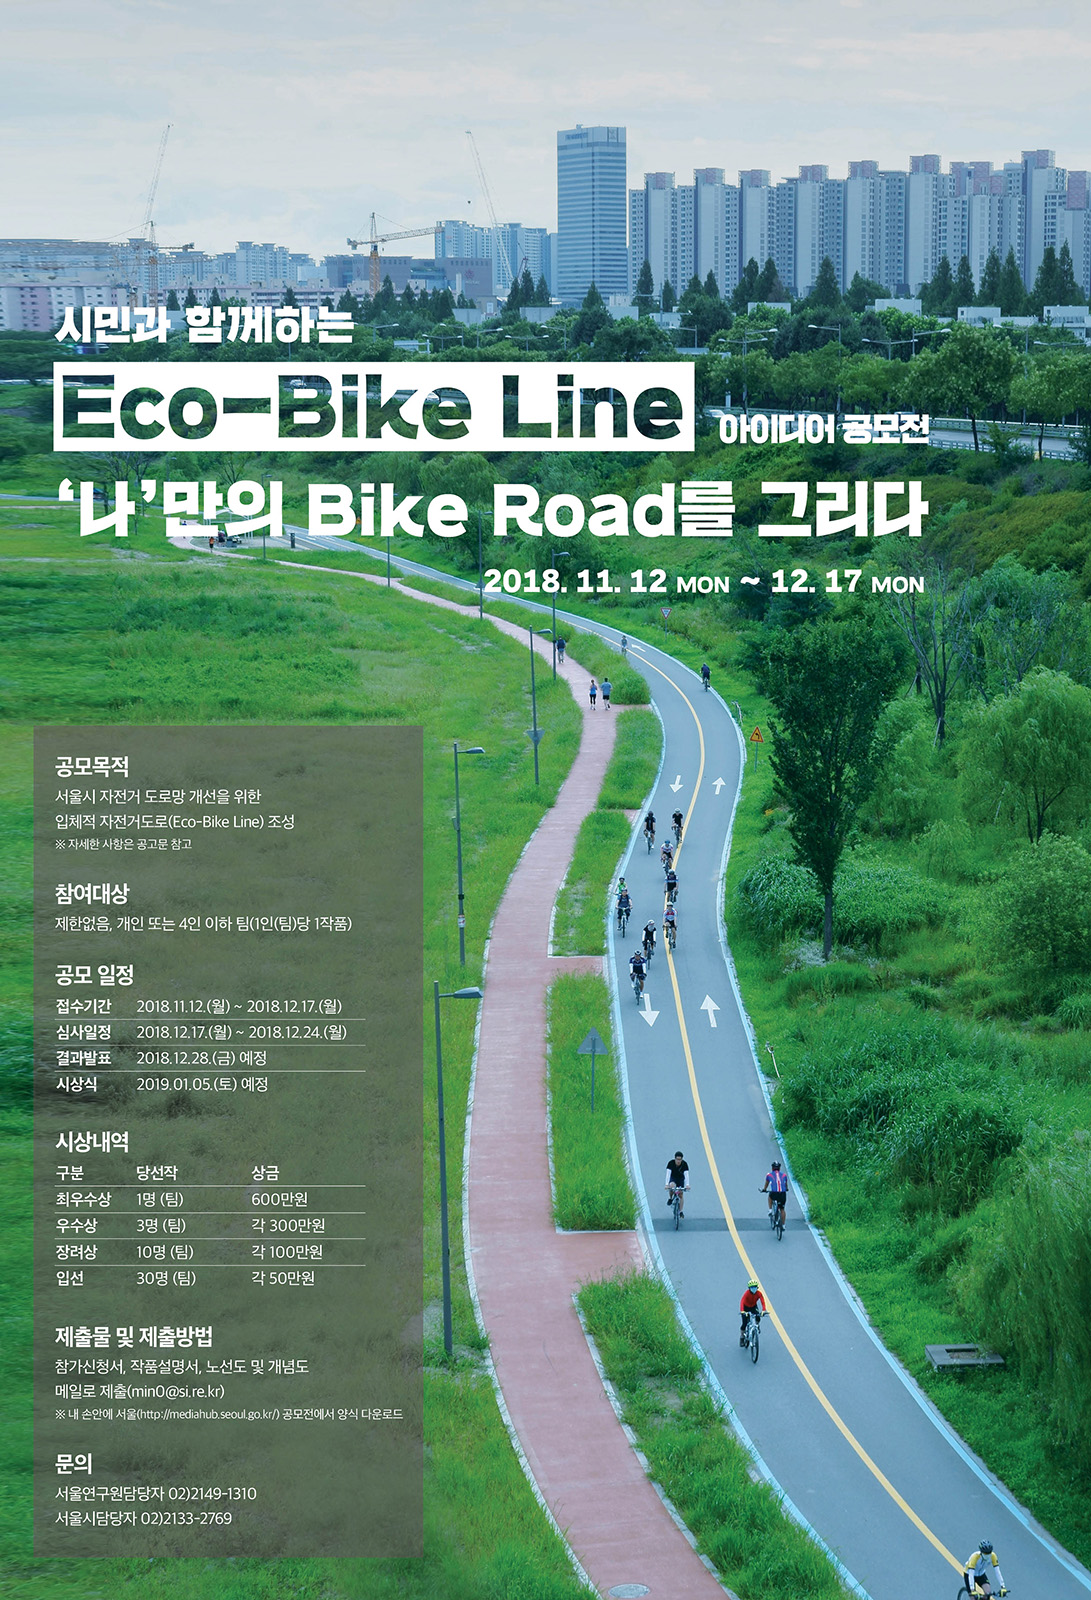 You are currently viewing 시민과 함께하는 Eco-Bike Line 아이디어